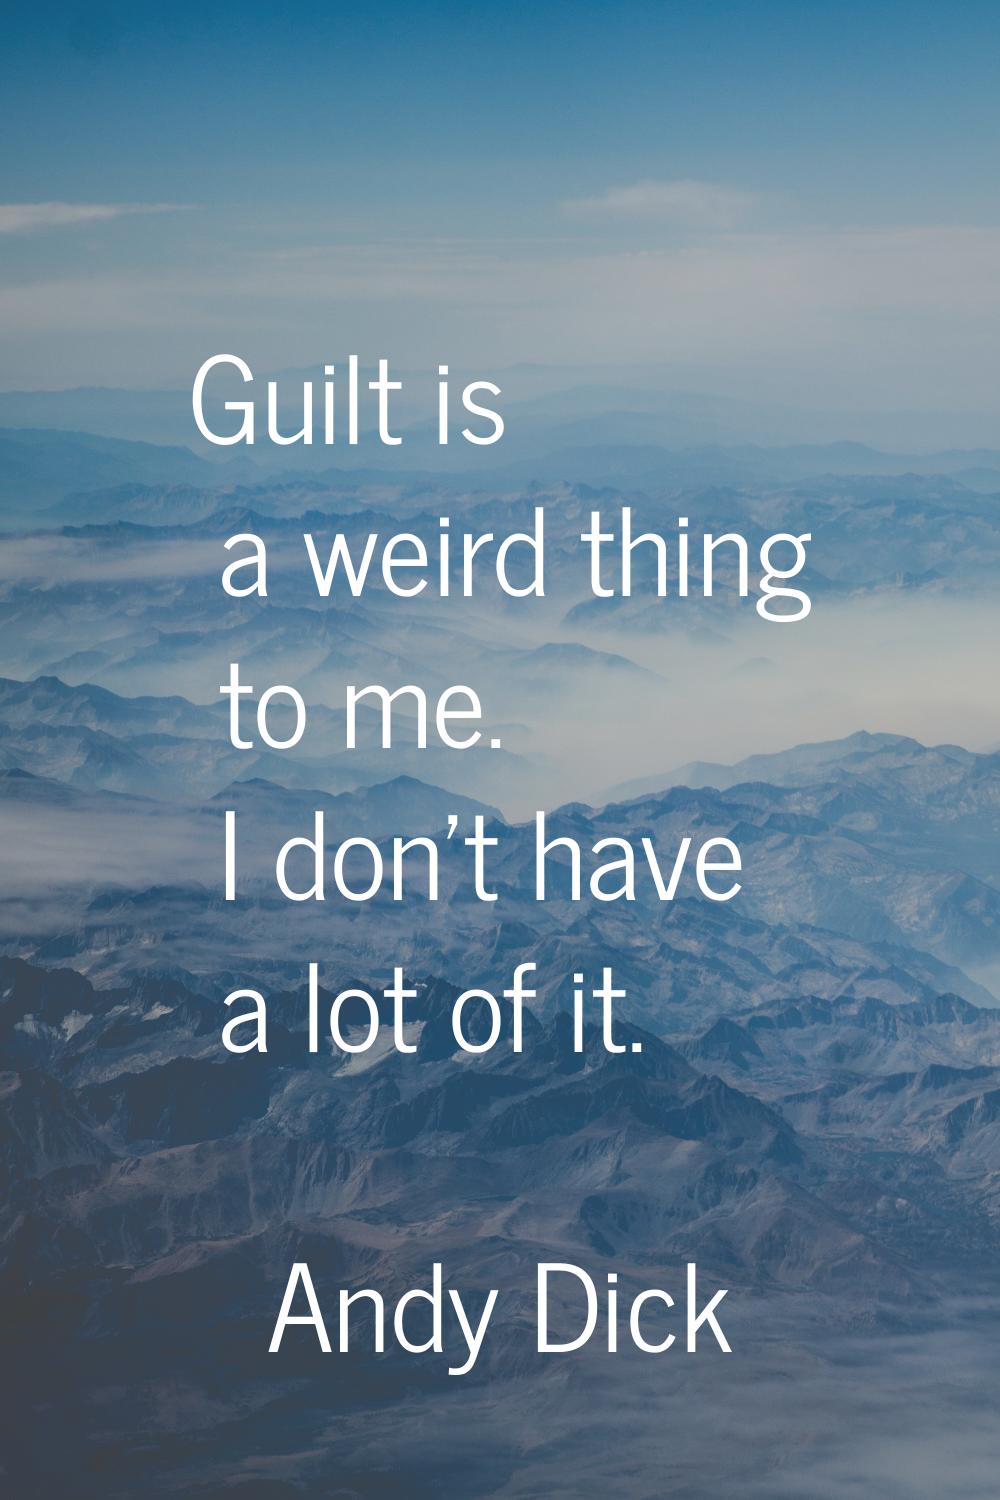 Guilt is a weird thing to me. I don't have a lot of it.